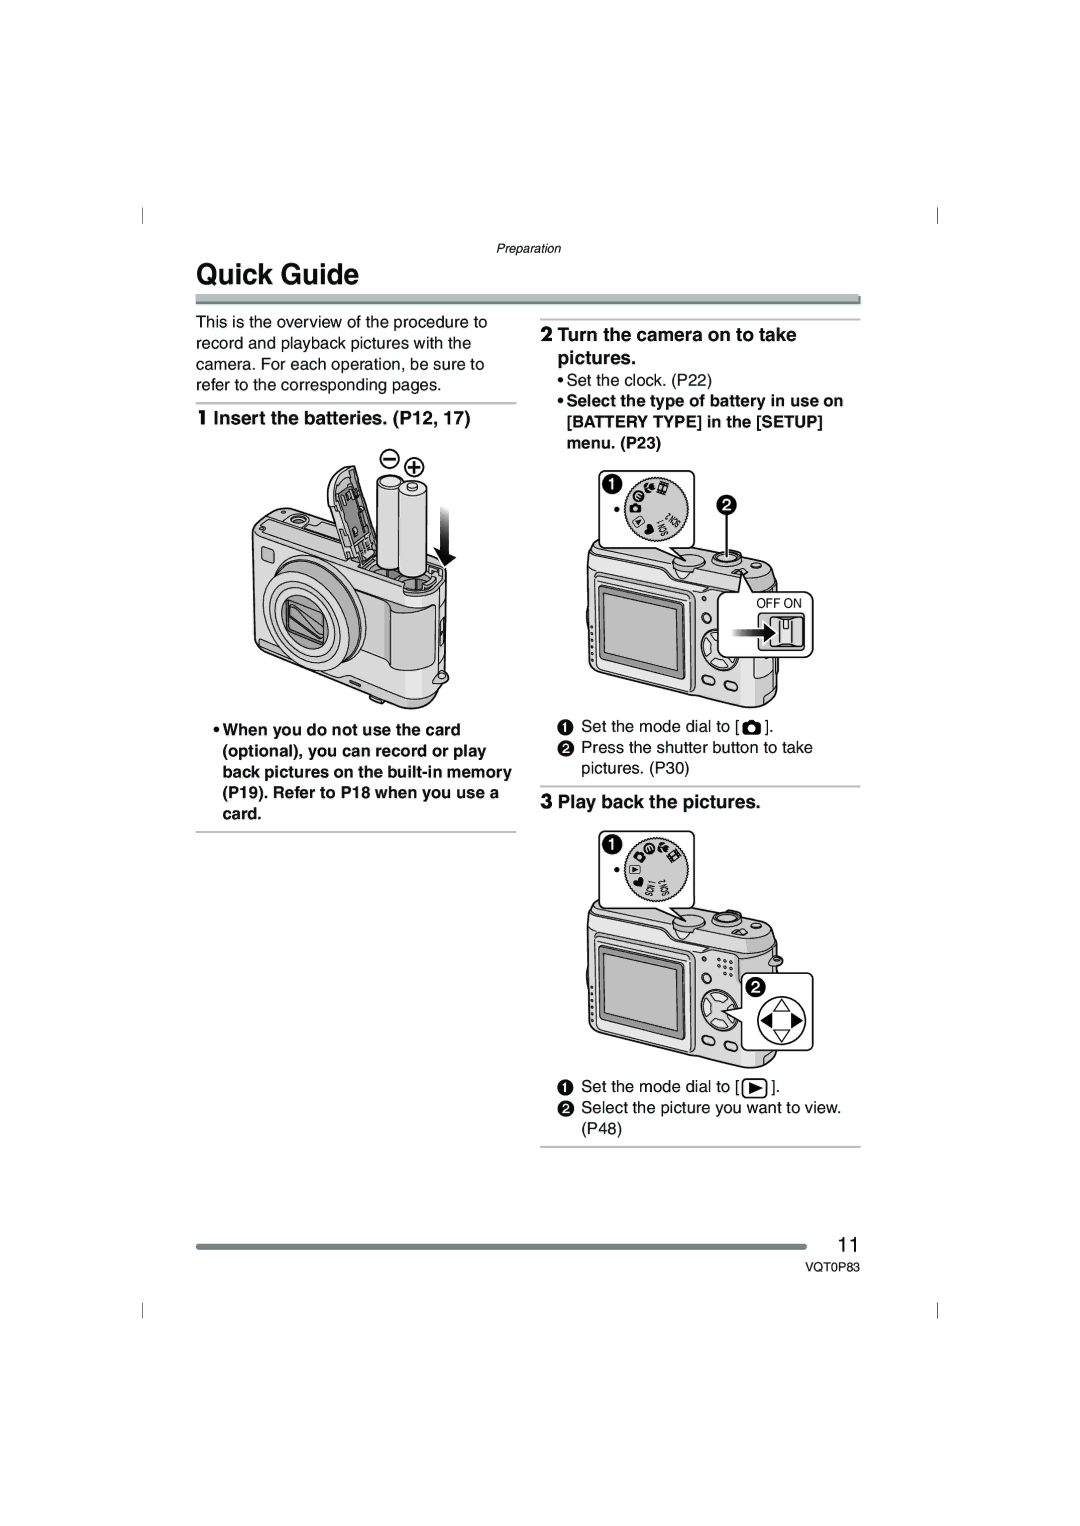 Panasonic DMC-LZ1GN, DMC-LZ2GN operating instructions Quick Guide, Play back the pictures 